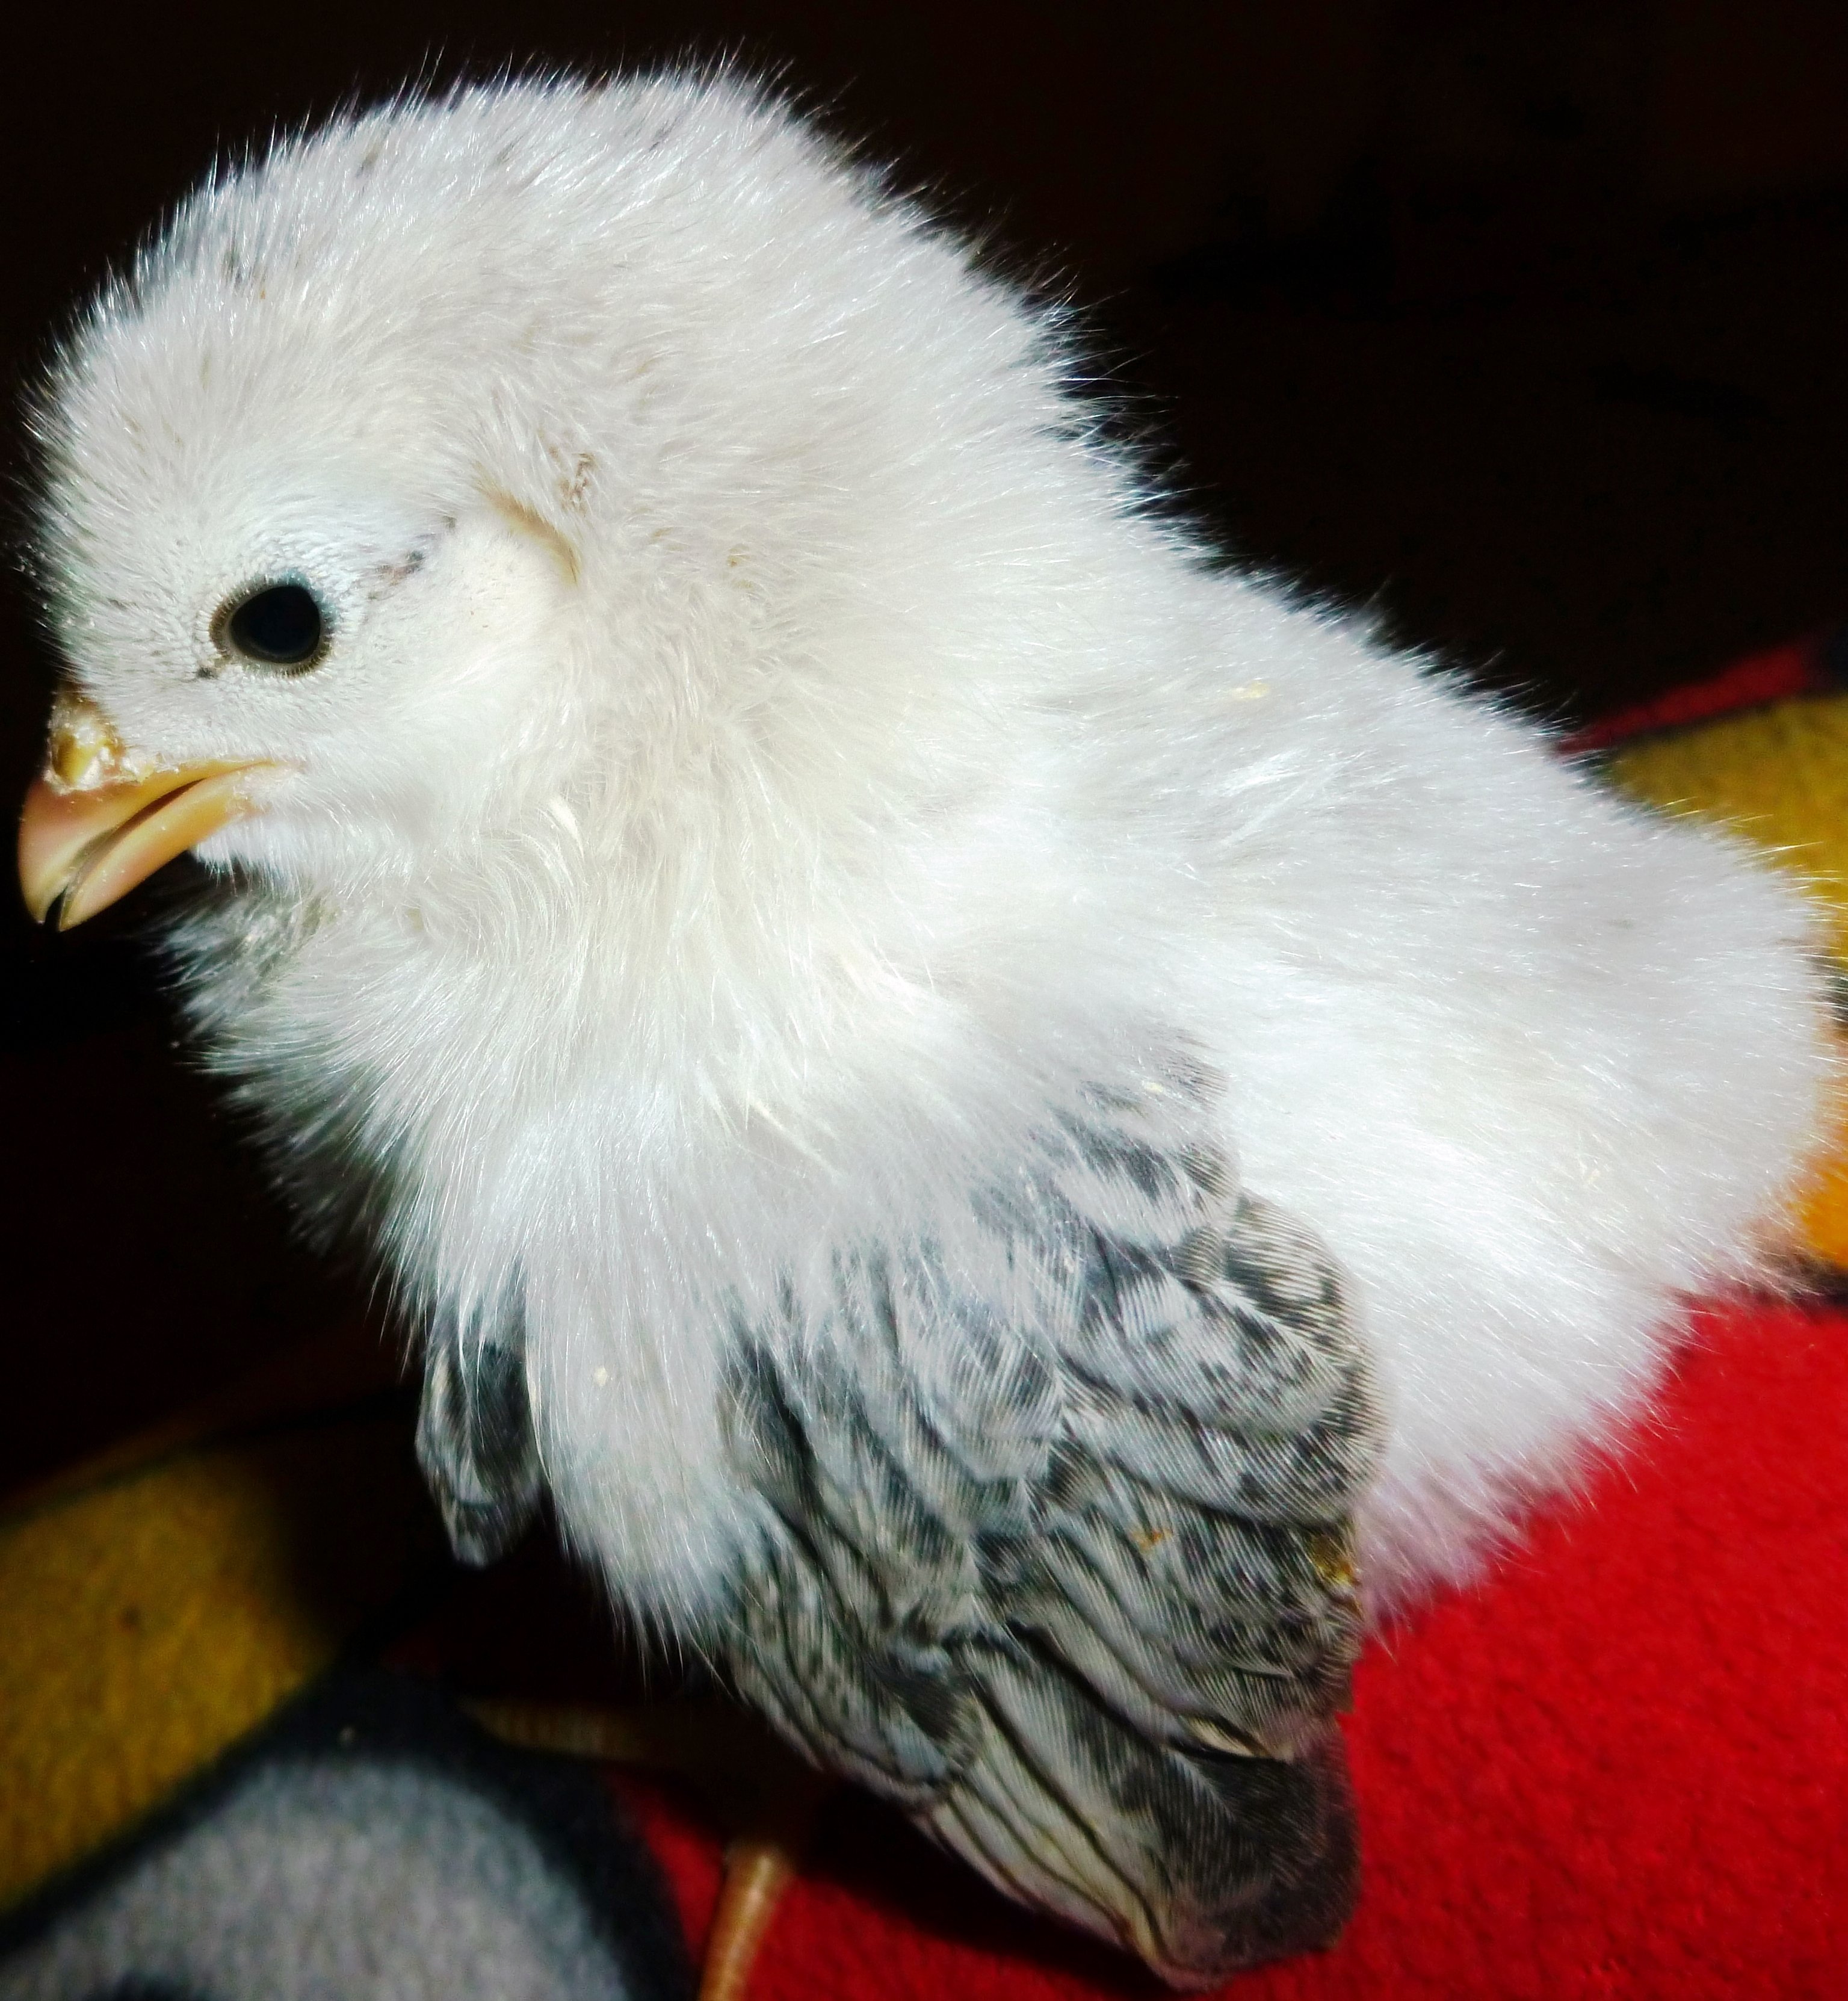 This chick is now grown and added to the selected hens for the 2014 breeding season, we will be posting all 2014 breeding stock in a new album soon. We named her "Olive" and she was able to make it into the breeding coop.